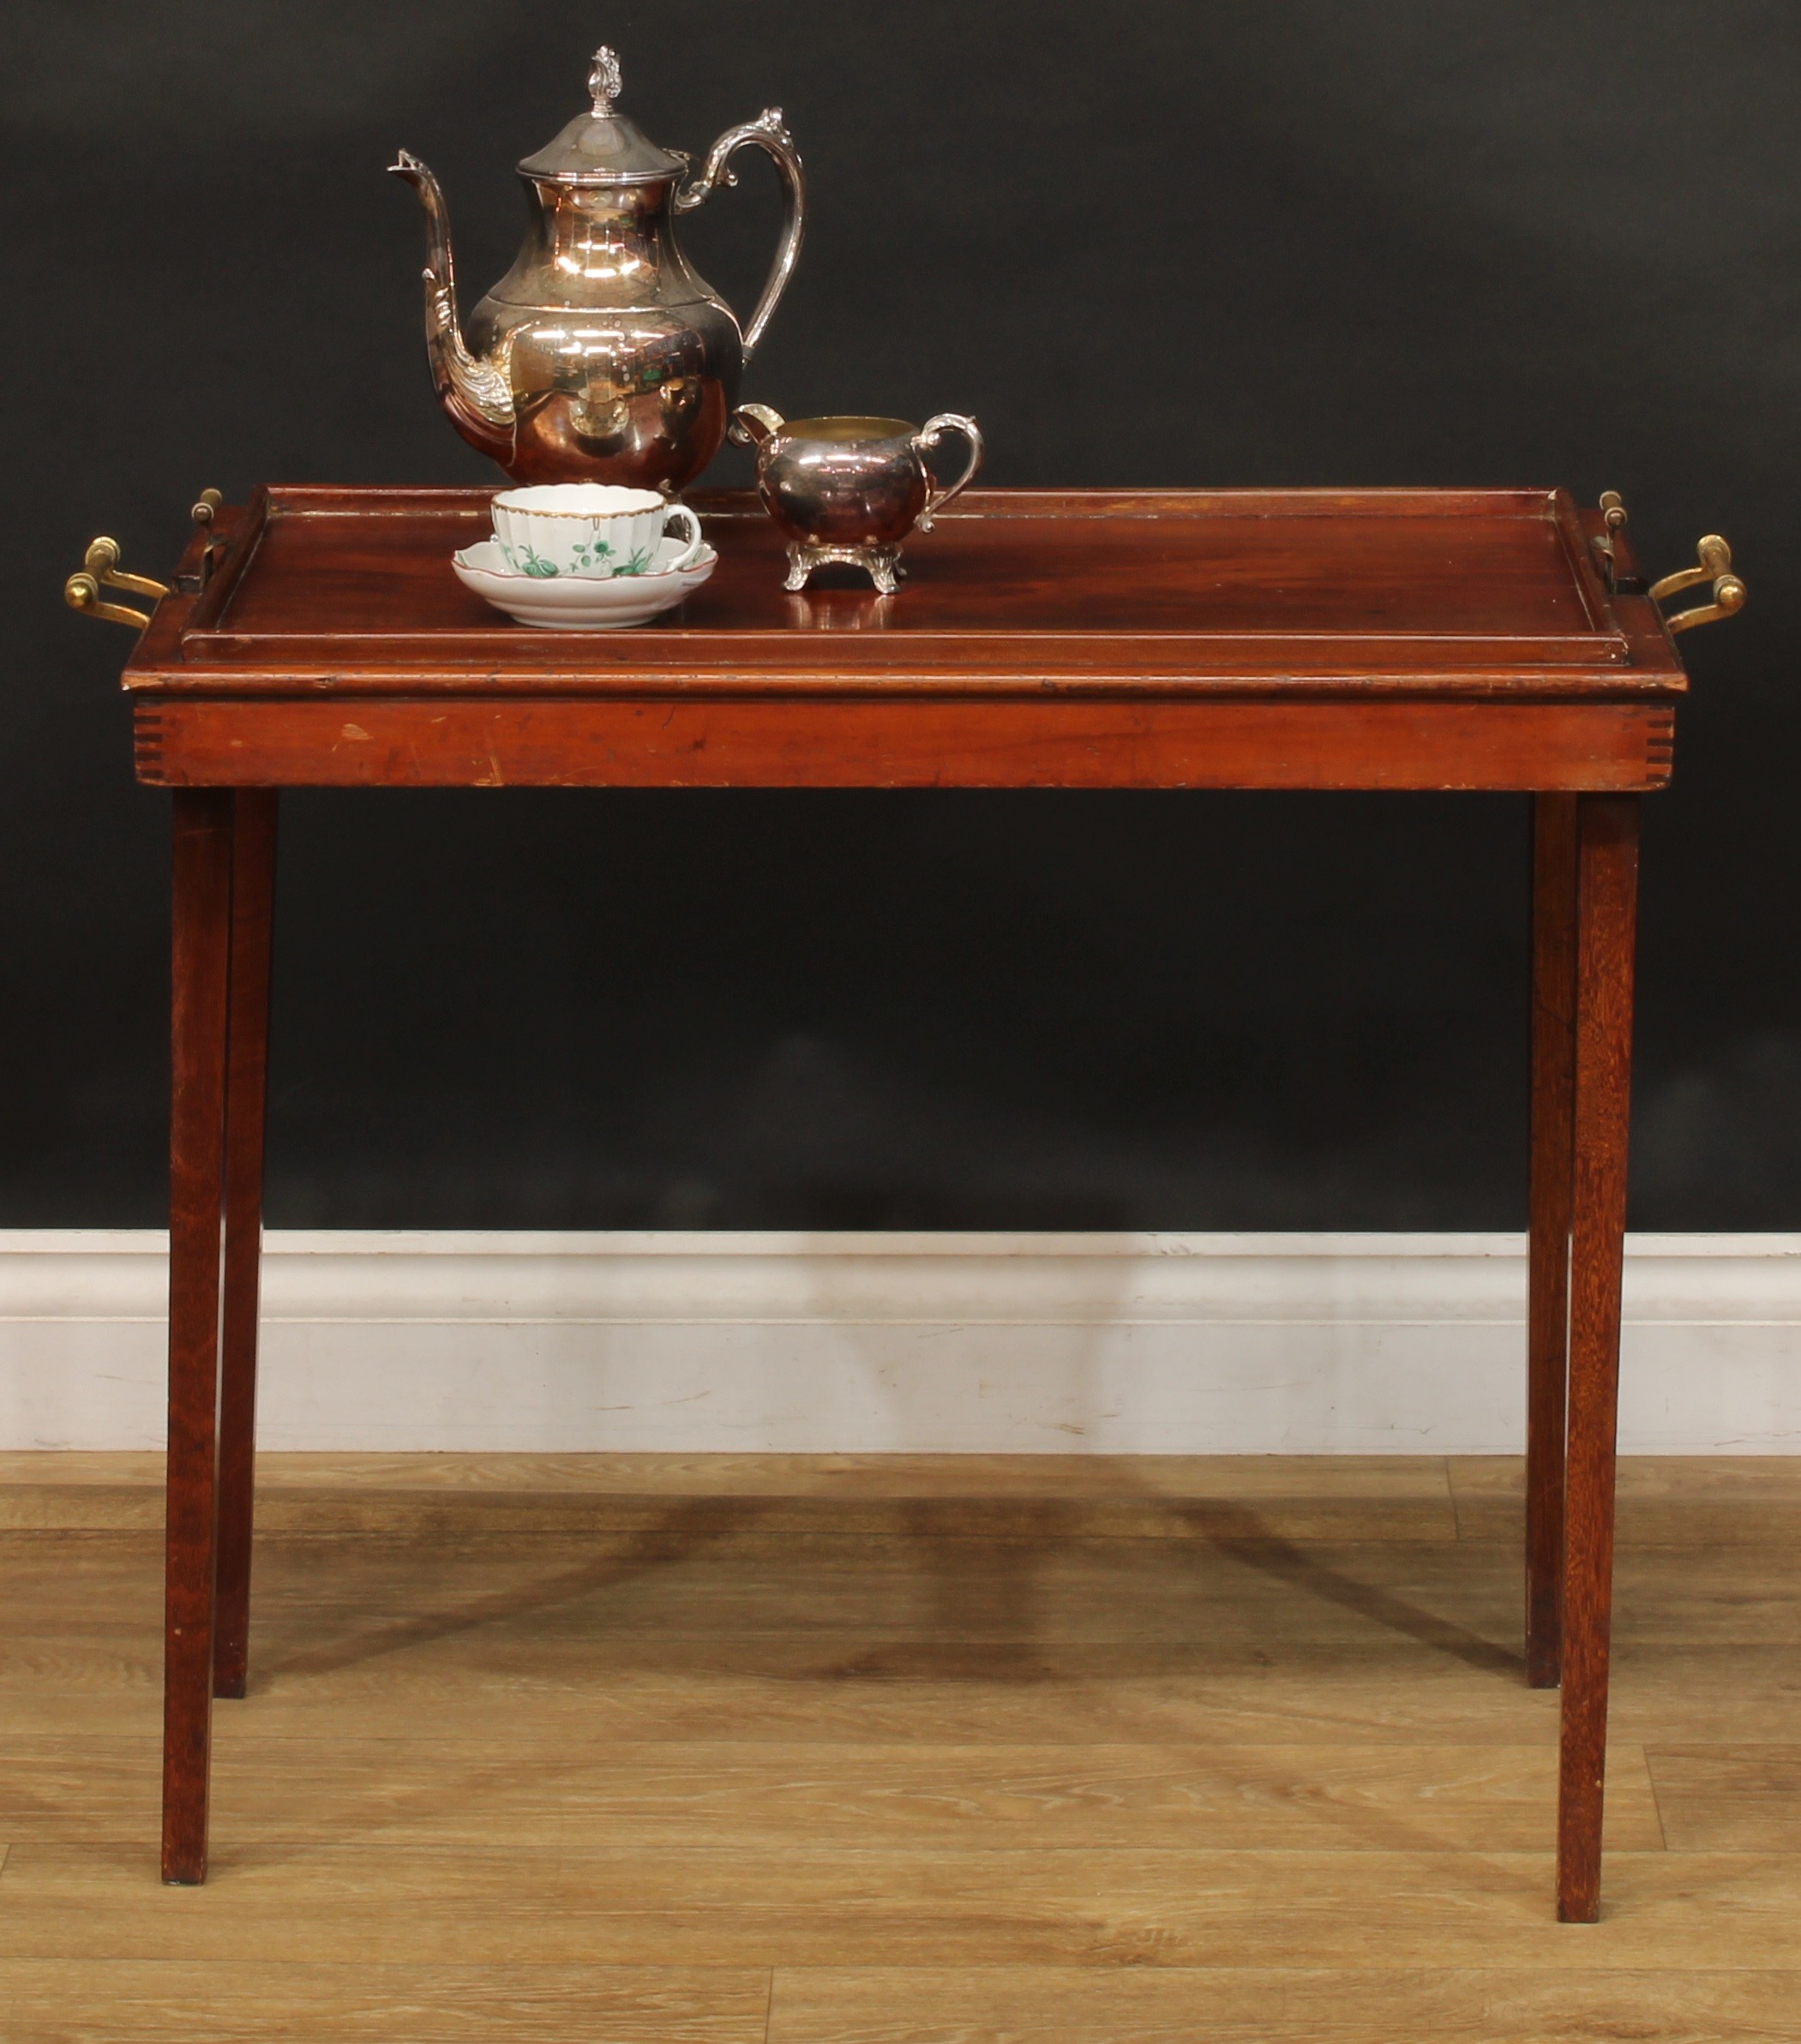 An Edwardian mahogany butler’s carry-and-stand serving tray, The Osterley Table Tray, rectangular